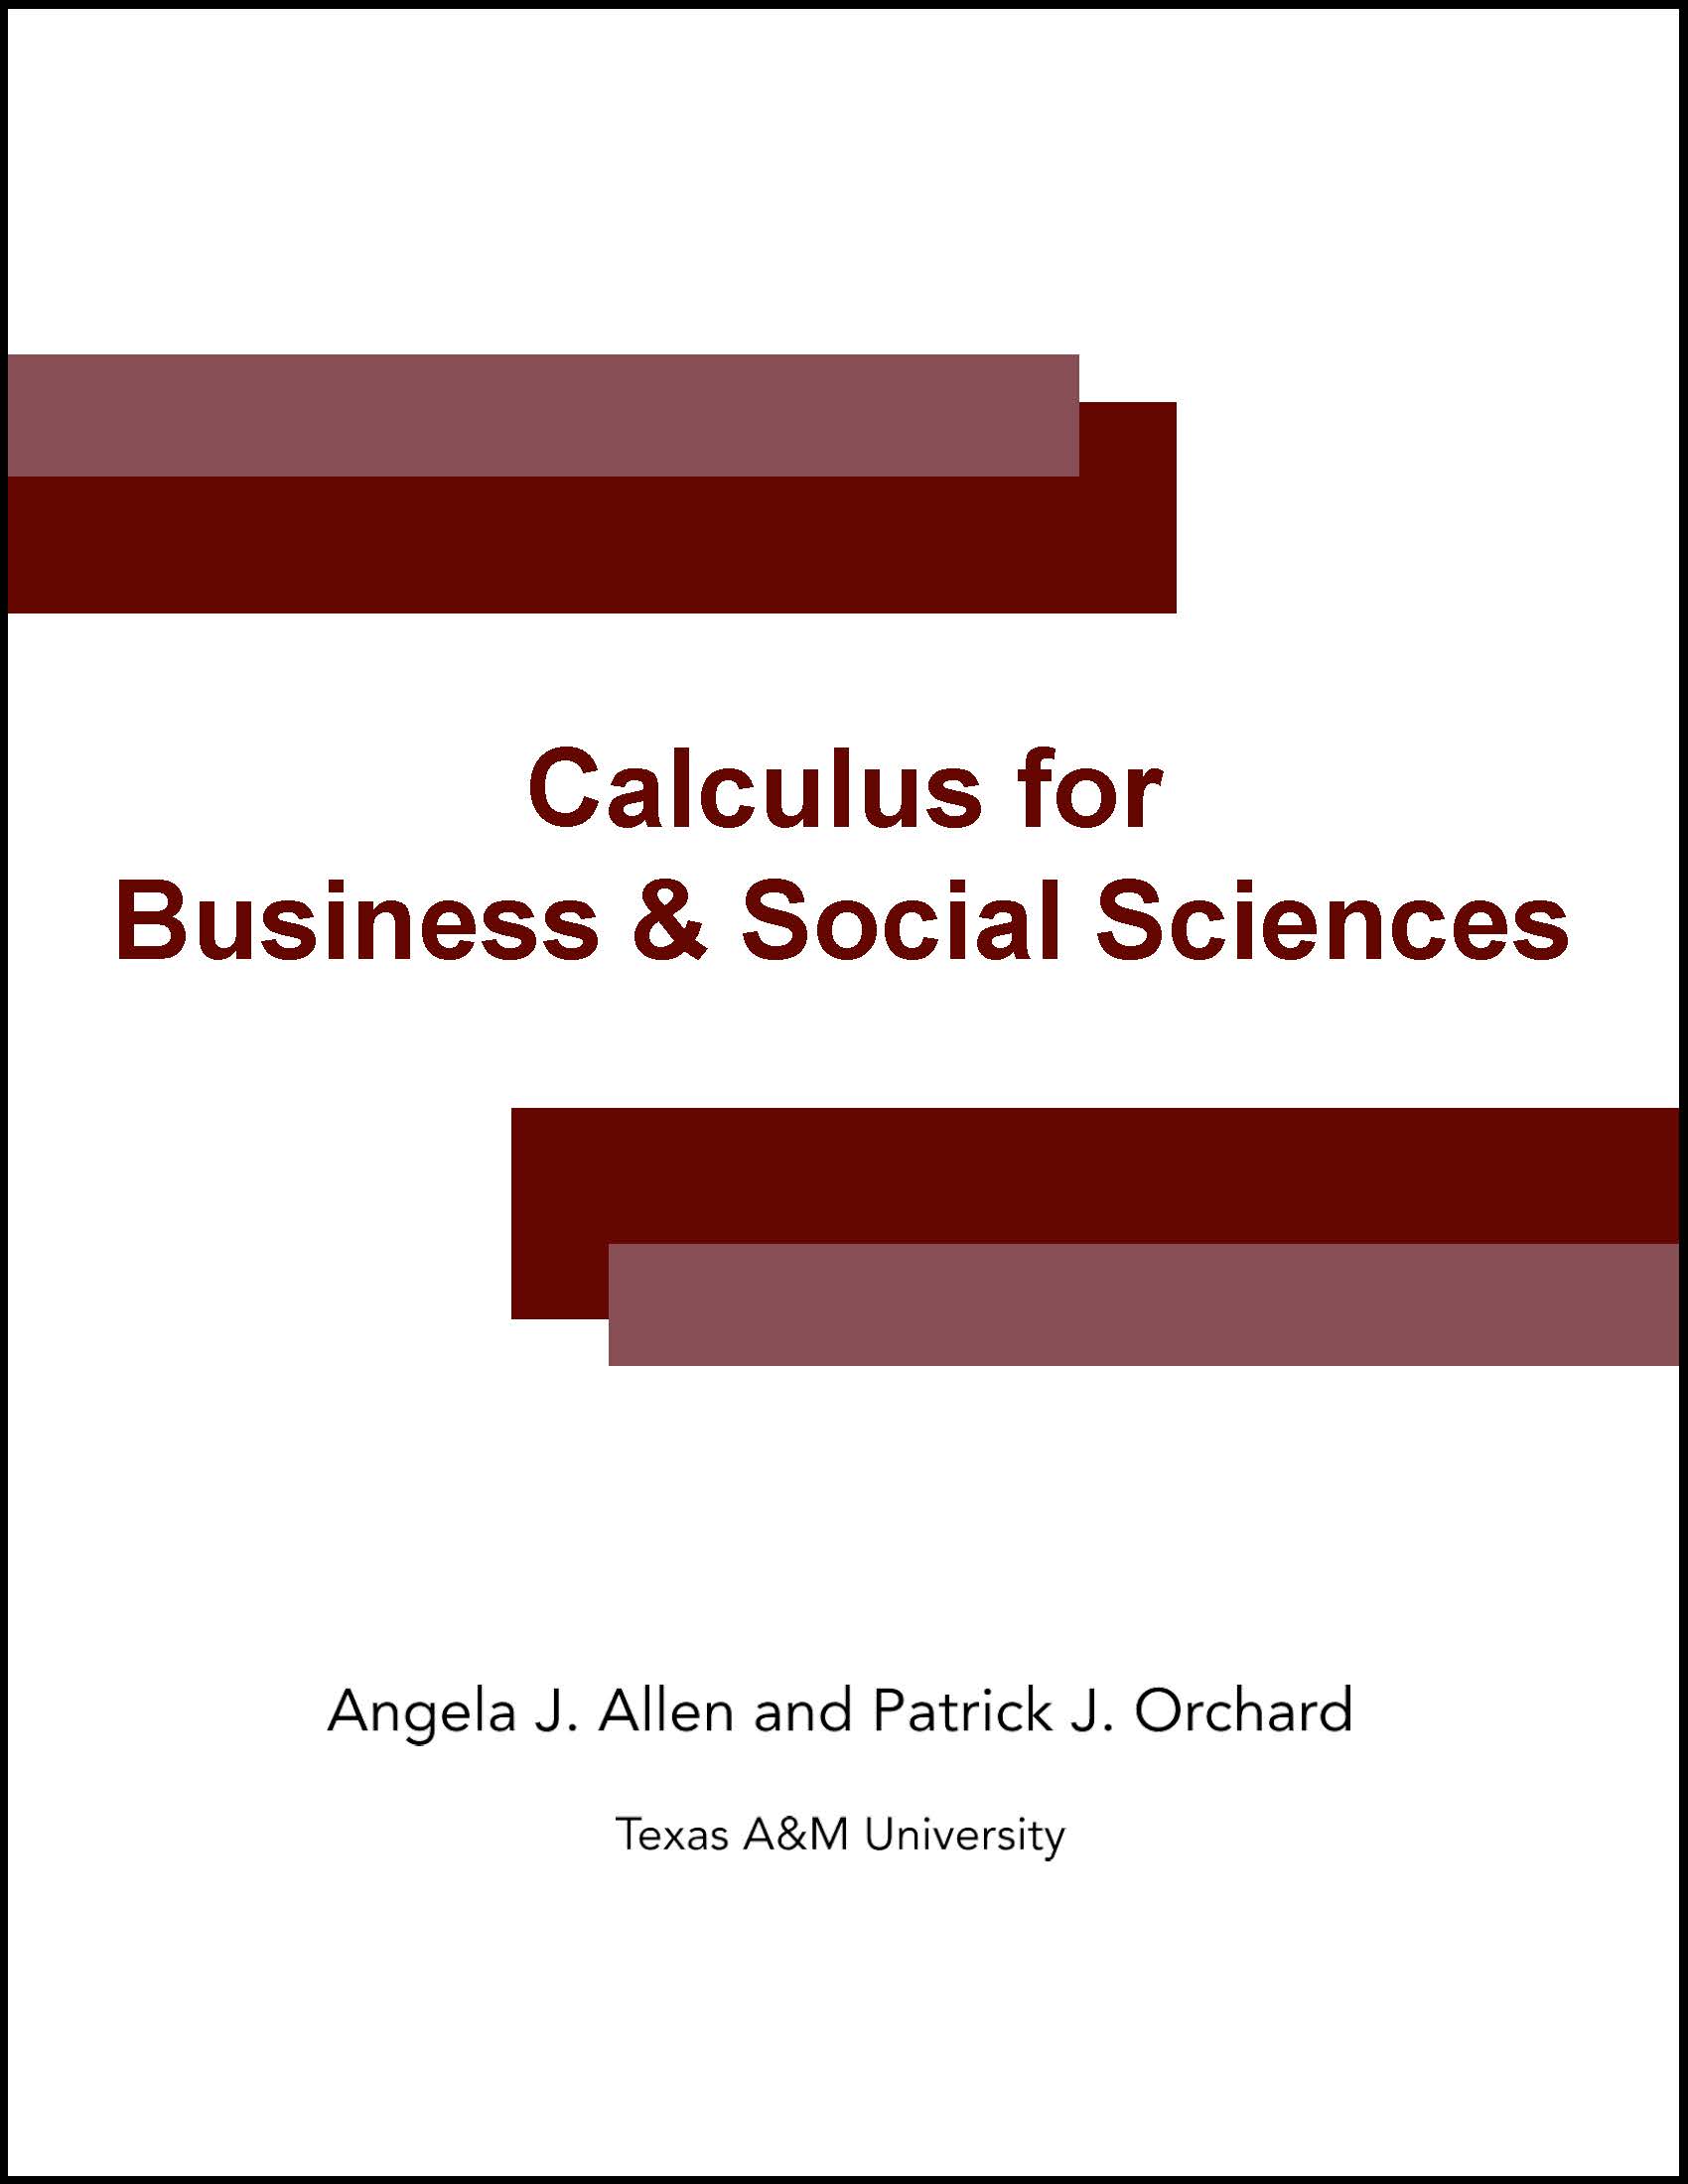 Calculus for Business & Social Sciences OER Textbook